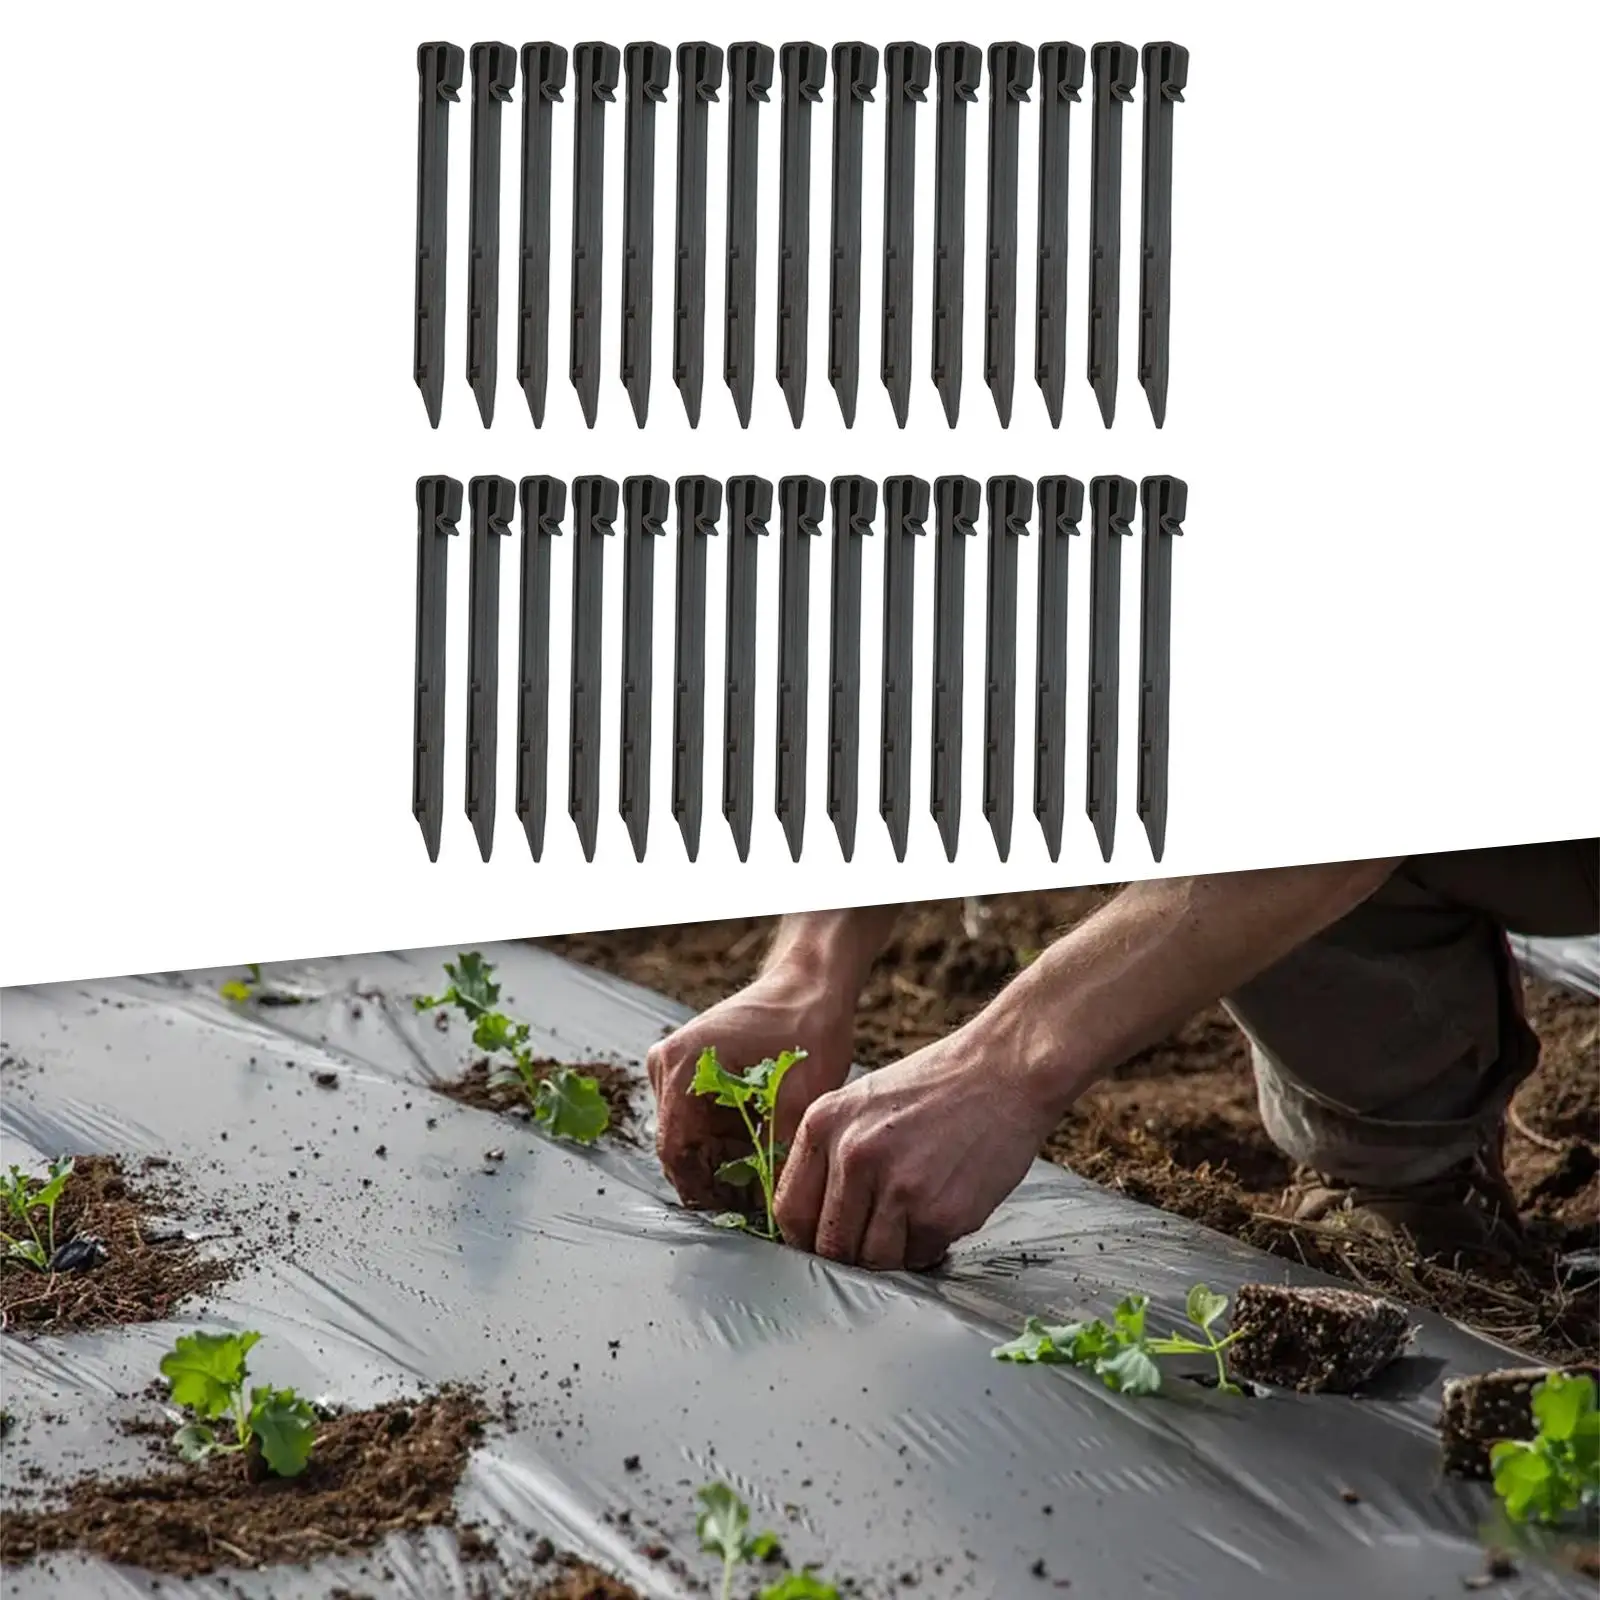 30Pcs Tent Pegs Stakes Easy to Intsall Yard Decorations Stakes Garden Nettings Anchors Fruit Tree Branch Spreader Stakes